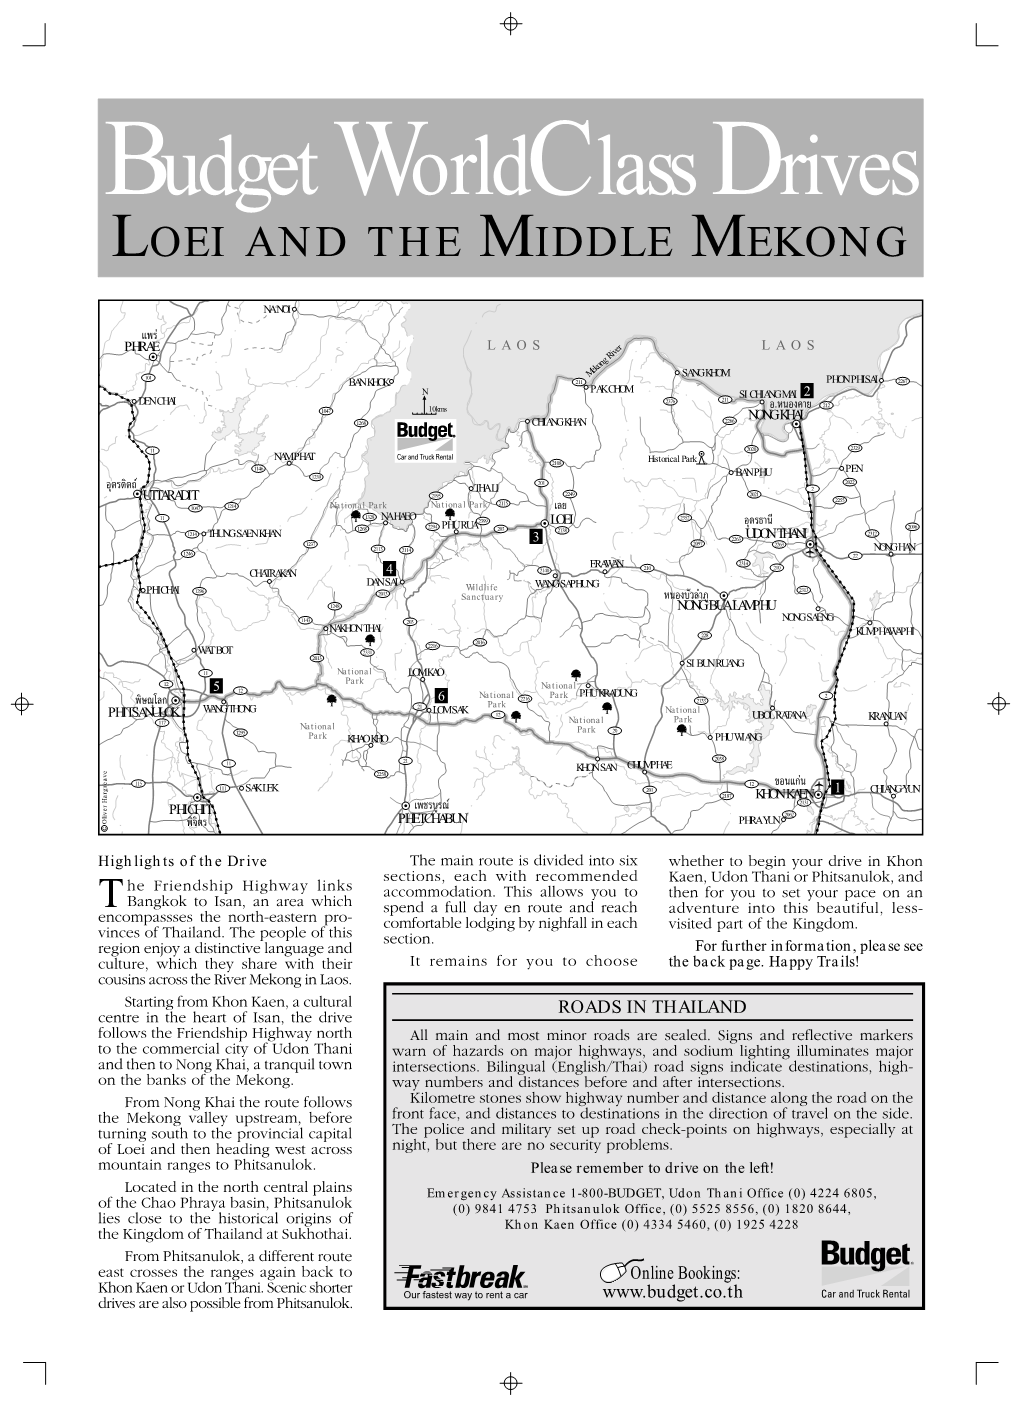 Loei and the Middle Mekong